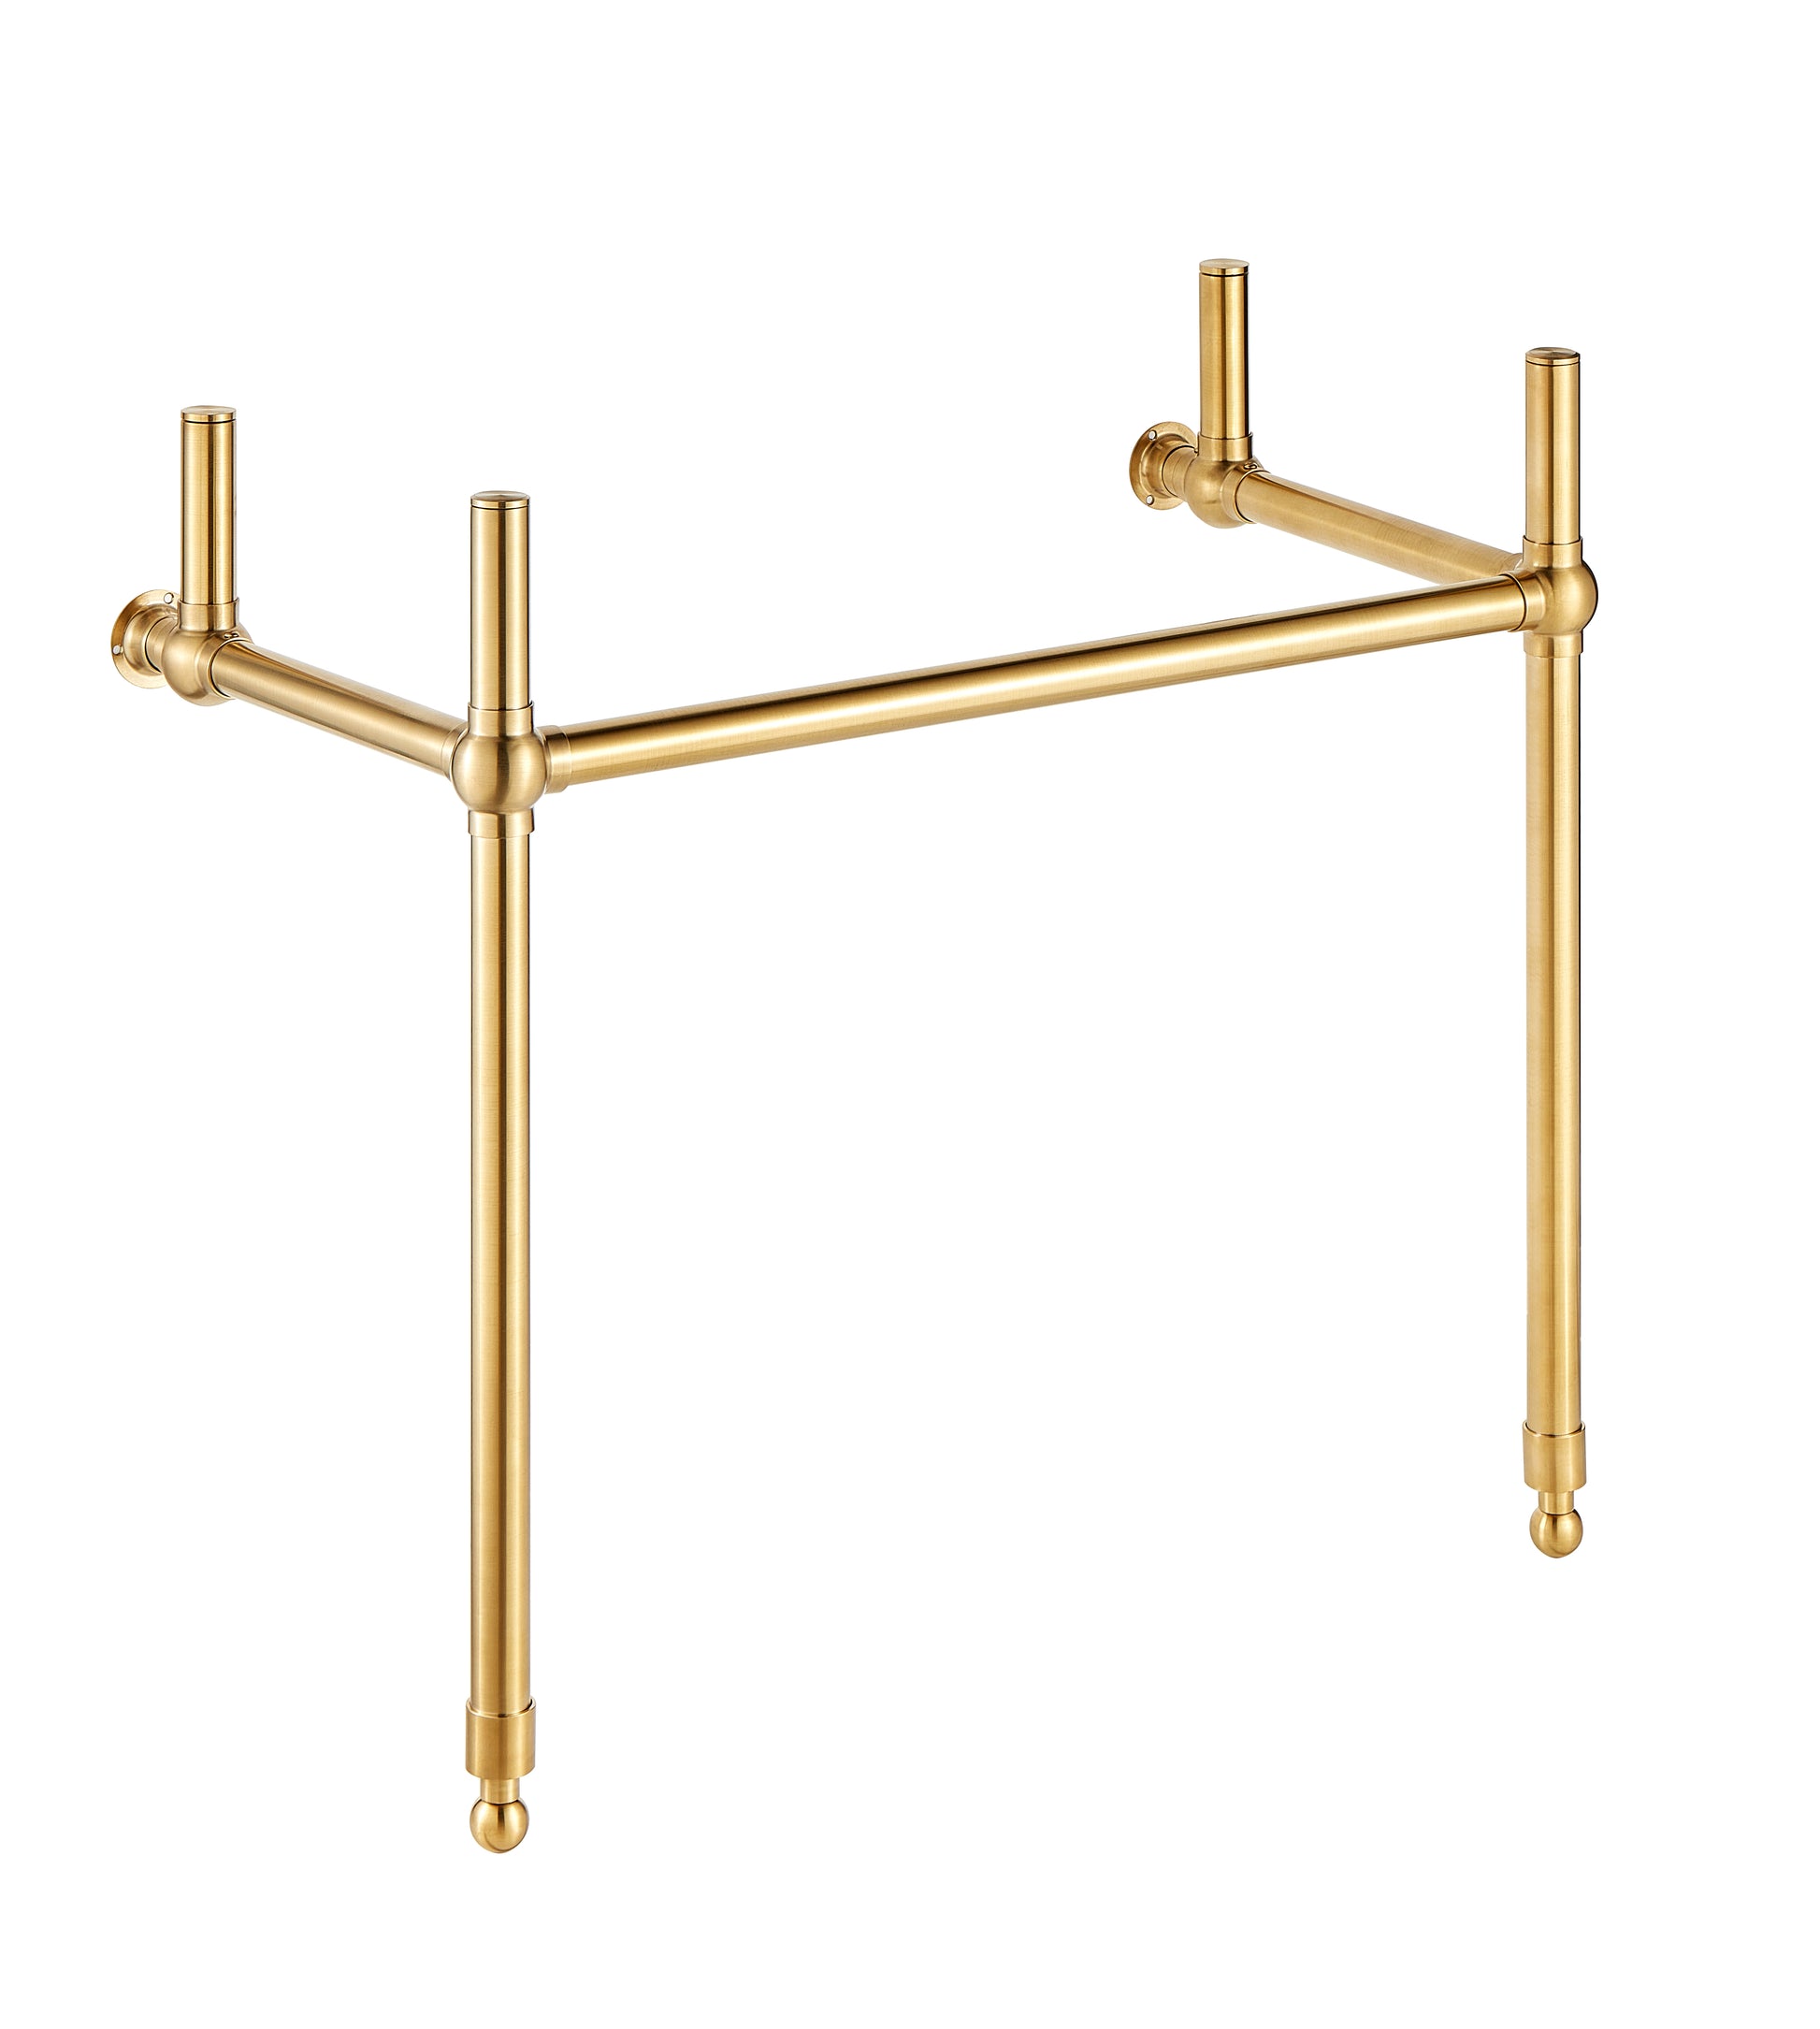 CS-FRKD01BG - Verona 34.5 in. Console Sink in Brushed Gold